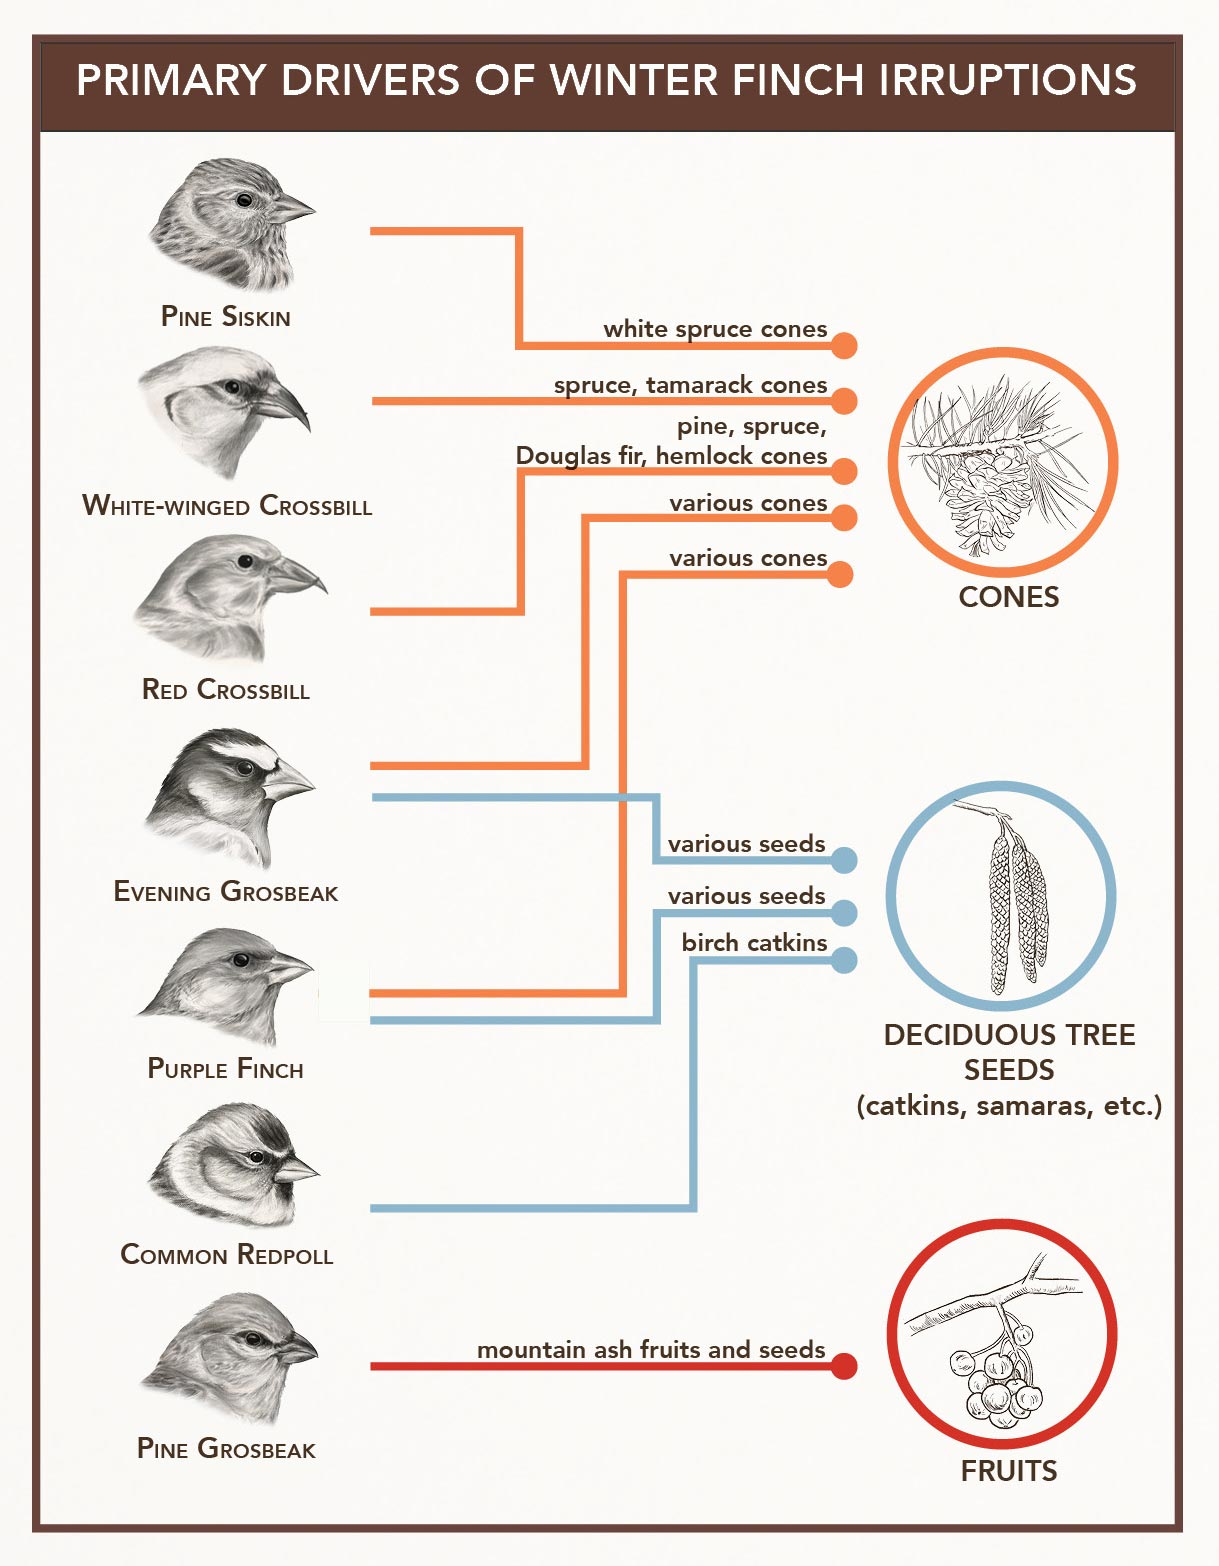 Drivers of winter finch irruptions. Illustrations and graphic by Jillian Ditner